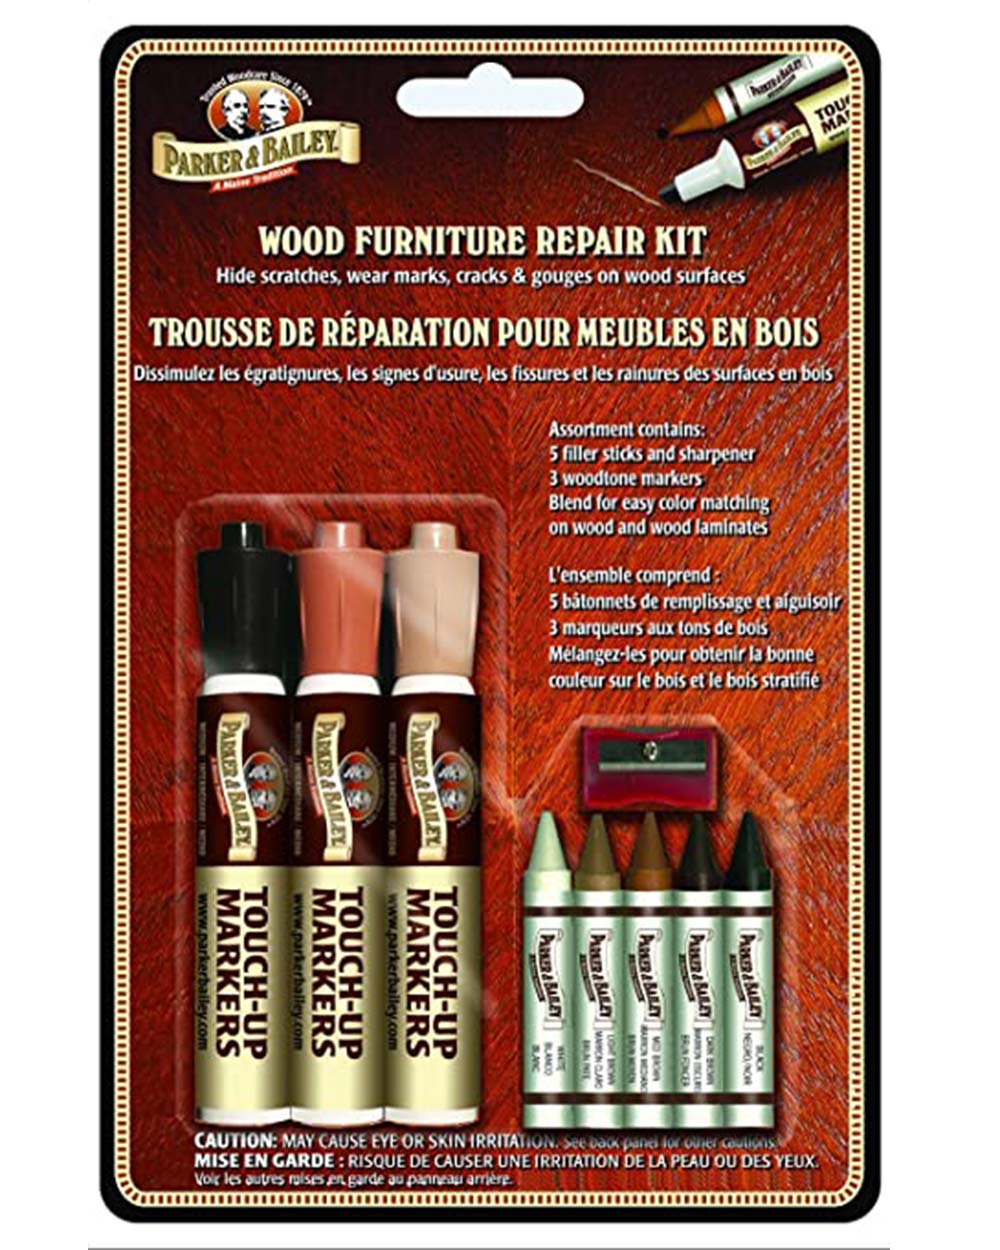 This wooden furniture repair kit can hide scratches, wear marks, cracks and more.   These specially formulated colour markers and crayon sticks are designed for restoring colour. Gently touching up hard wood floors, doors or furniture in a simple and easy way.   The crayon sticks come in 5 assorted shades to easily match up any wood tone. Super handy to have in the home, this kit also comes with a sharpener to use over and over, making this a great value buy.